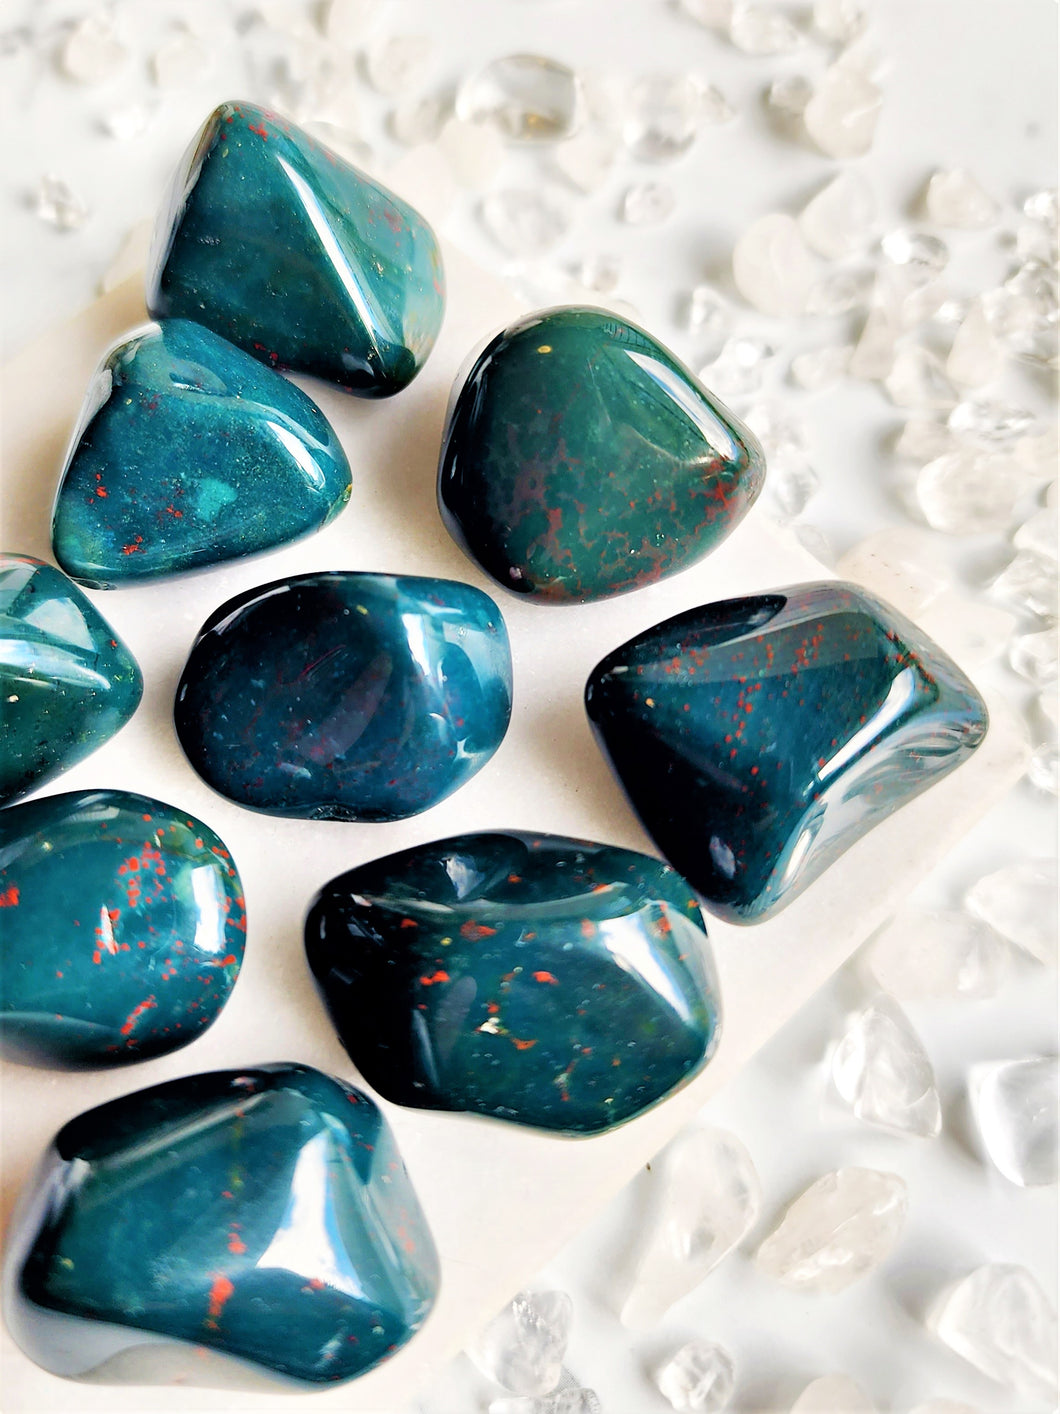  2 / 2  Bloodstone is believed to possess powerful spiritual properties, promoting courage, strength, and vitality while also enhancing one's connection to the earth.